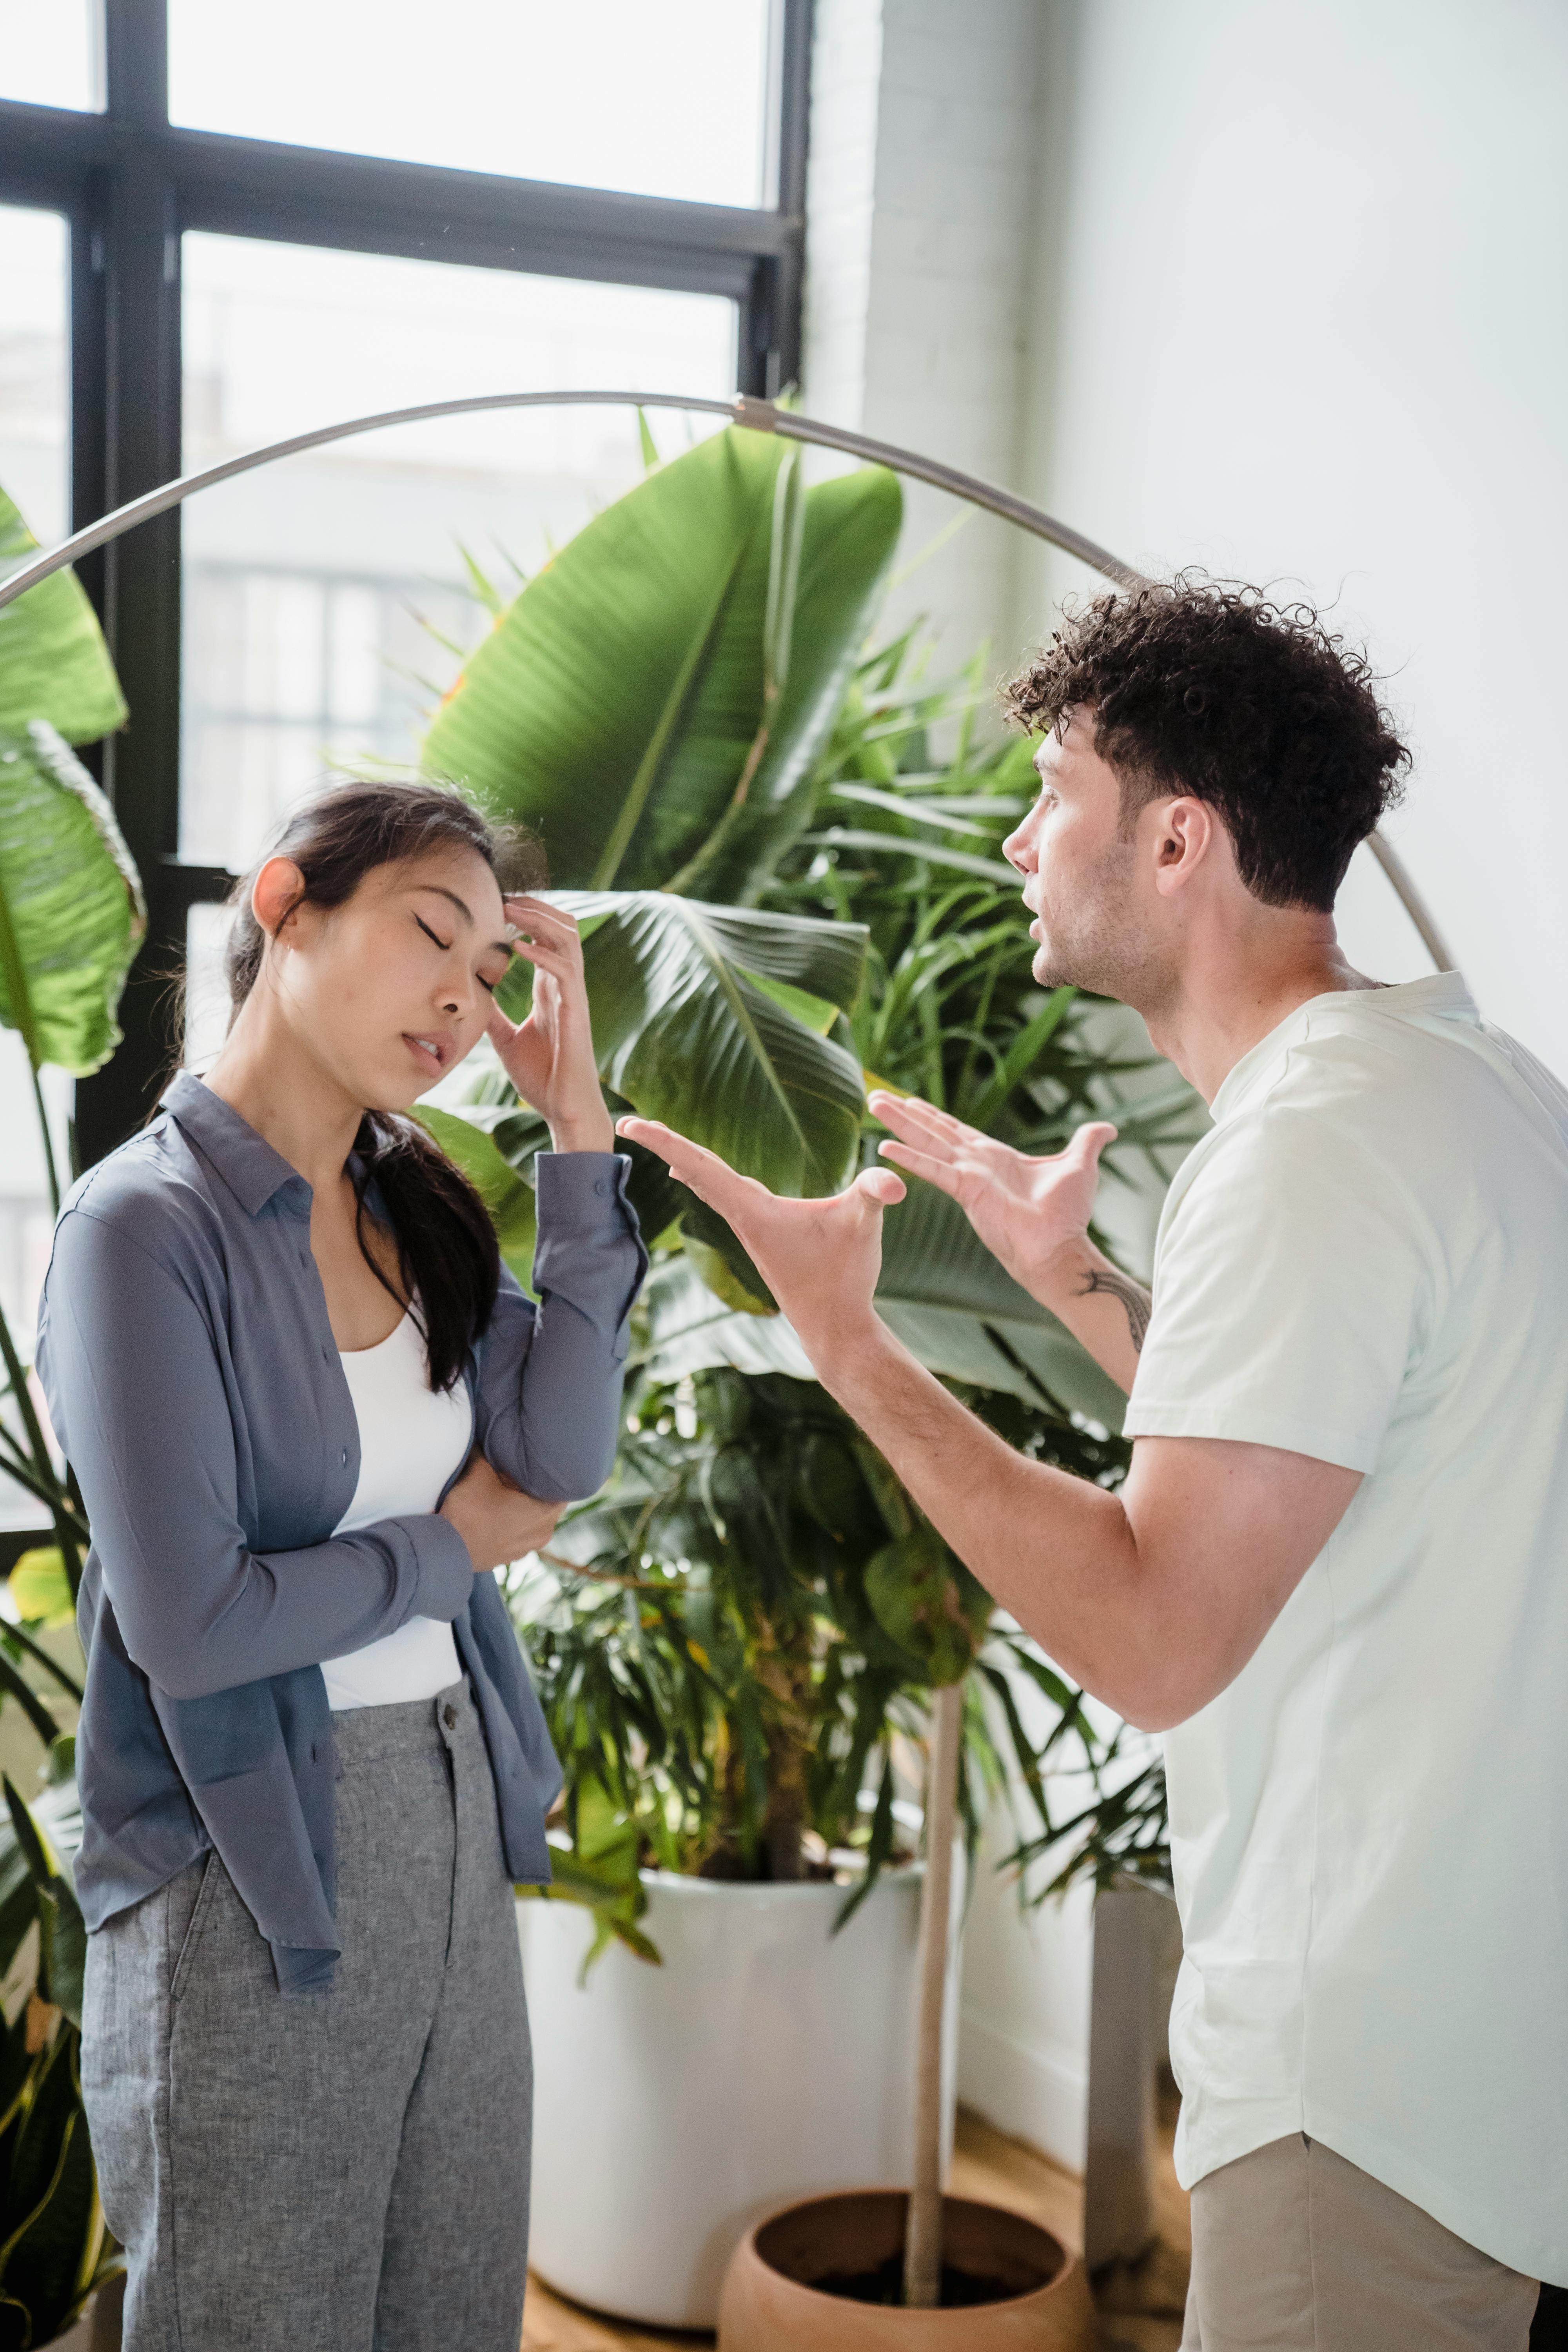 A man and a woman in a heated argument | Source: Pexels